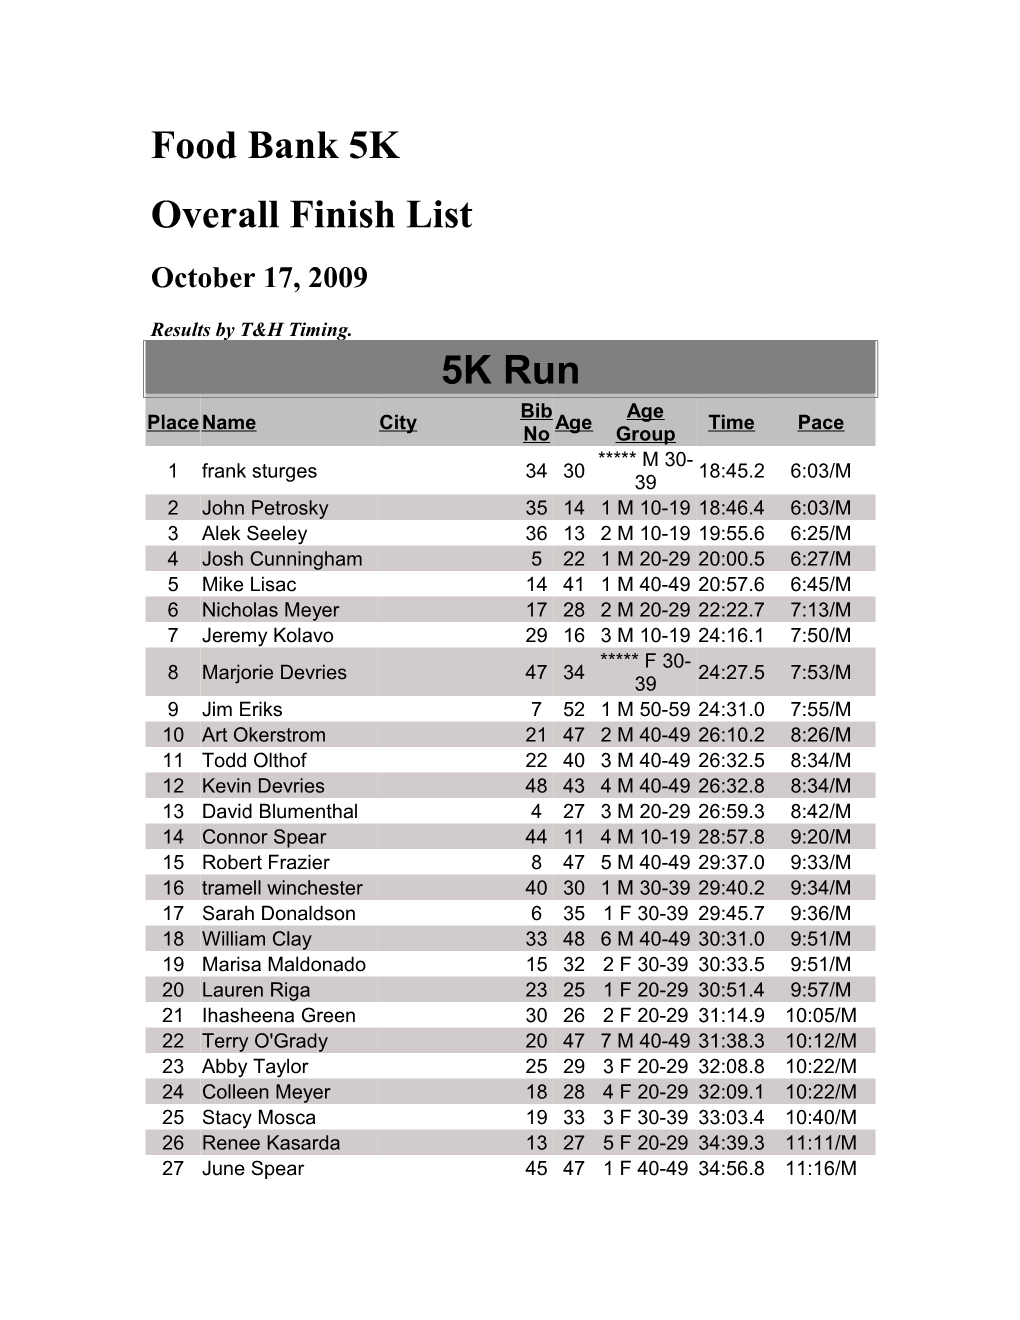 Overall Finish List s3